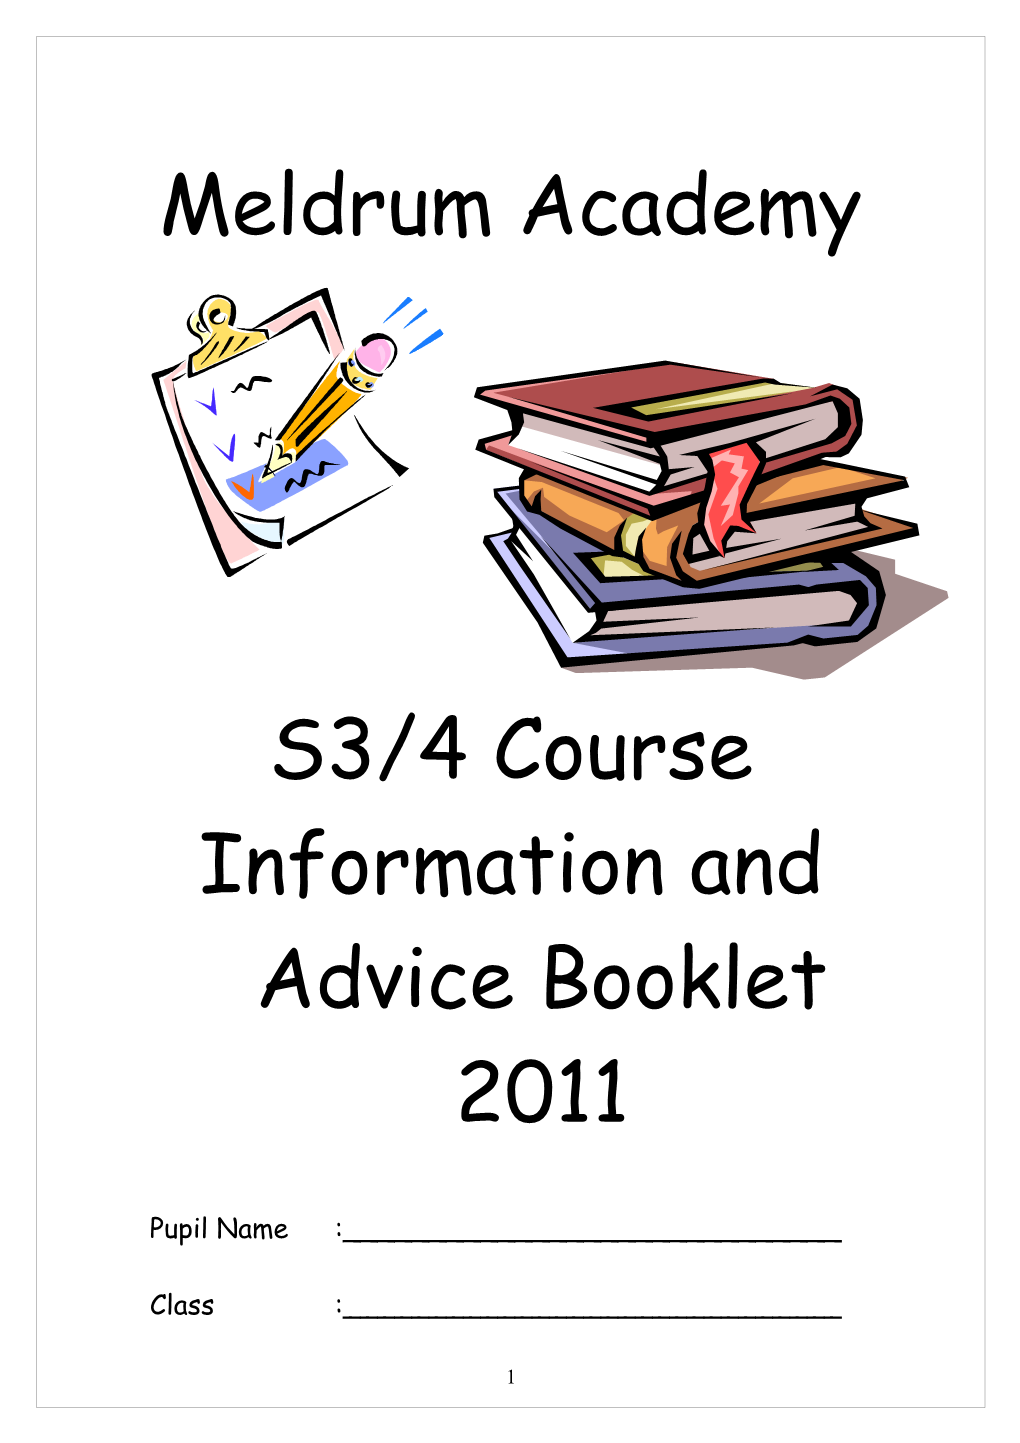 Information and Advice Booklet 2011